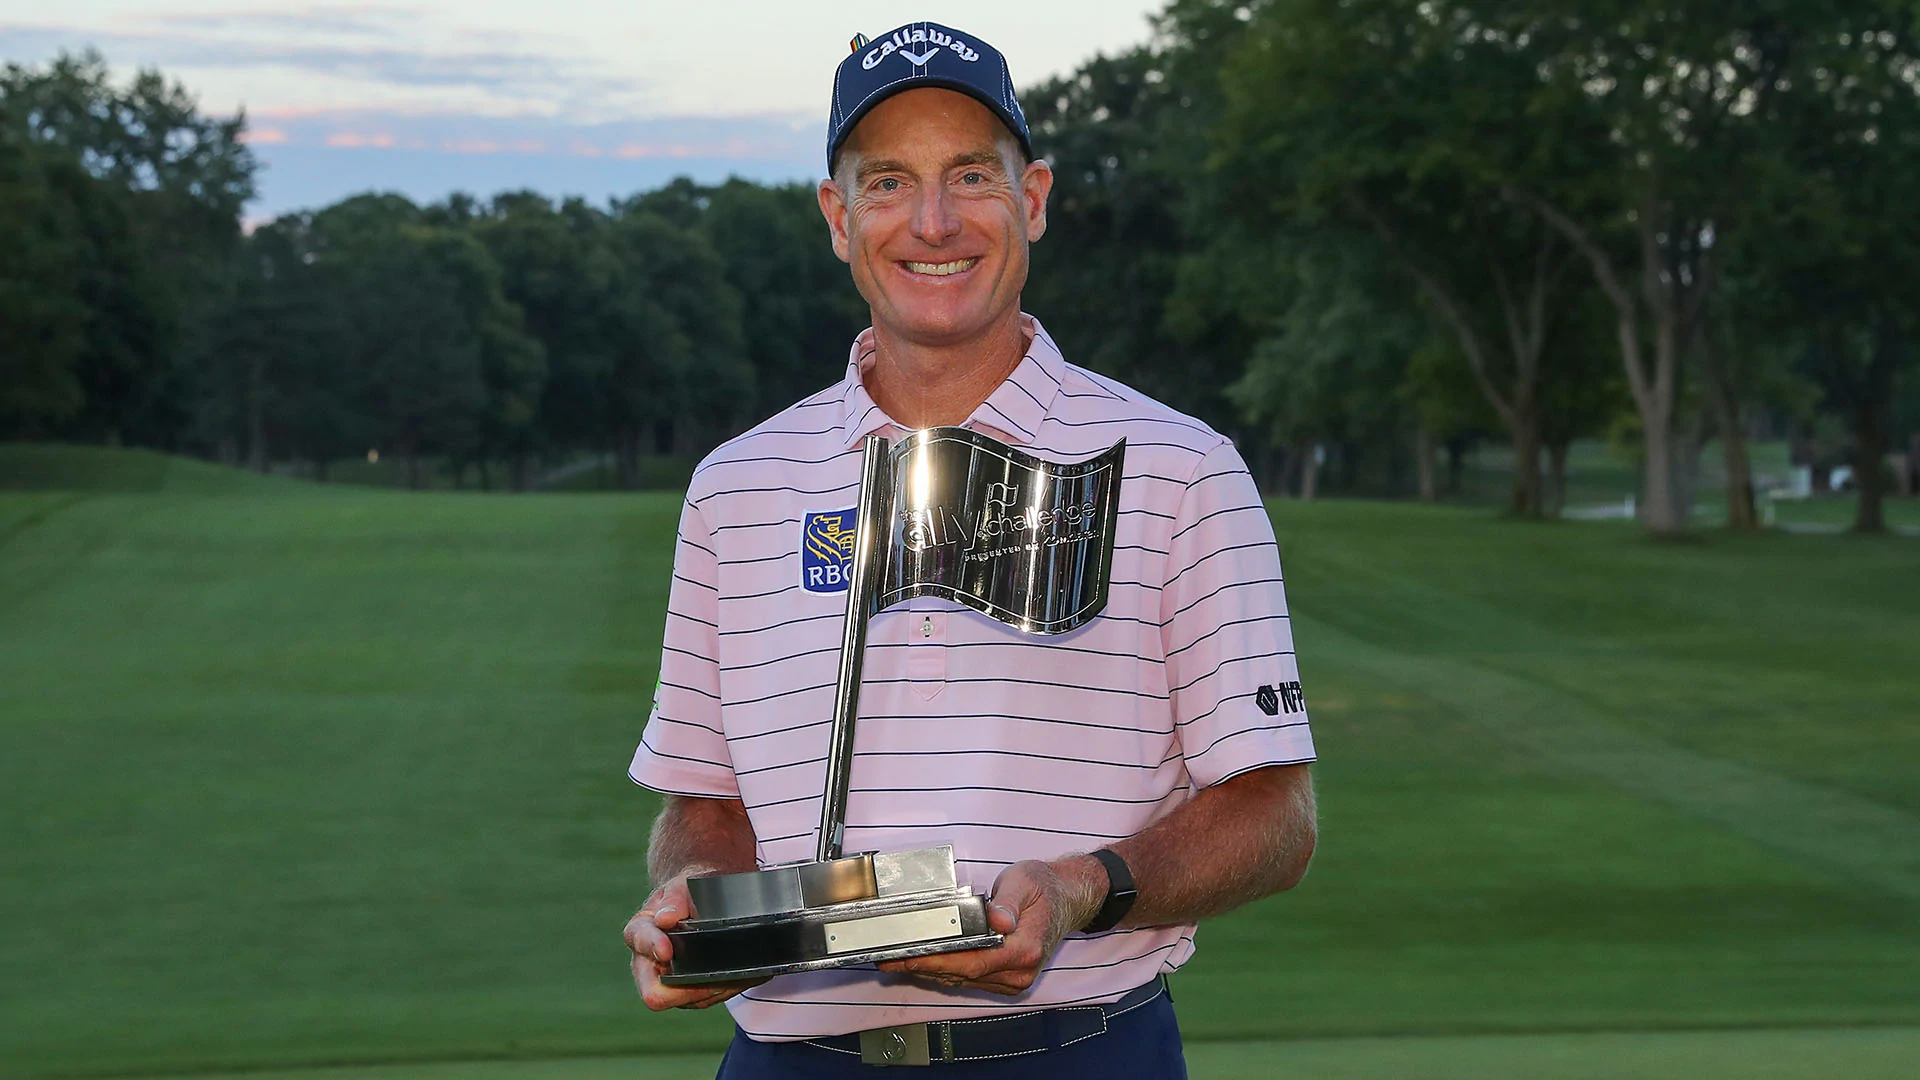 Jim Furyk (68) wins Ally Challenge in PGA Tour Champions debut